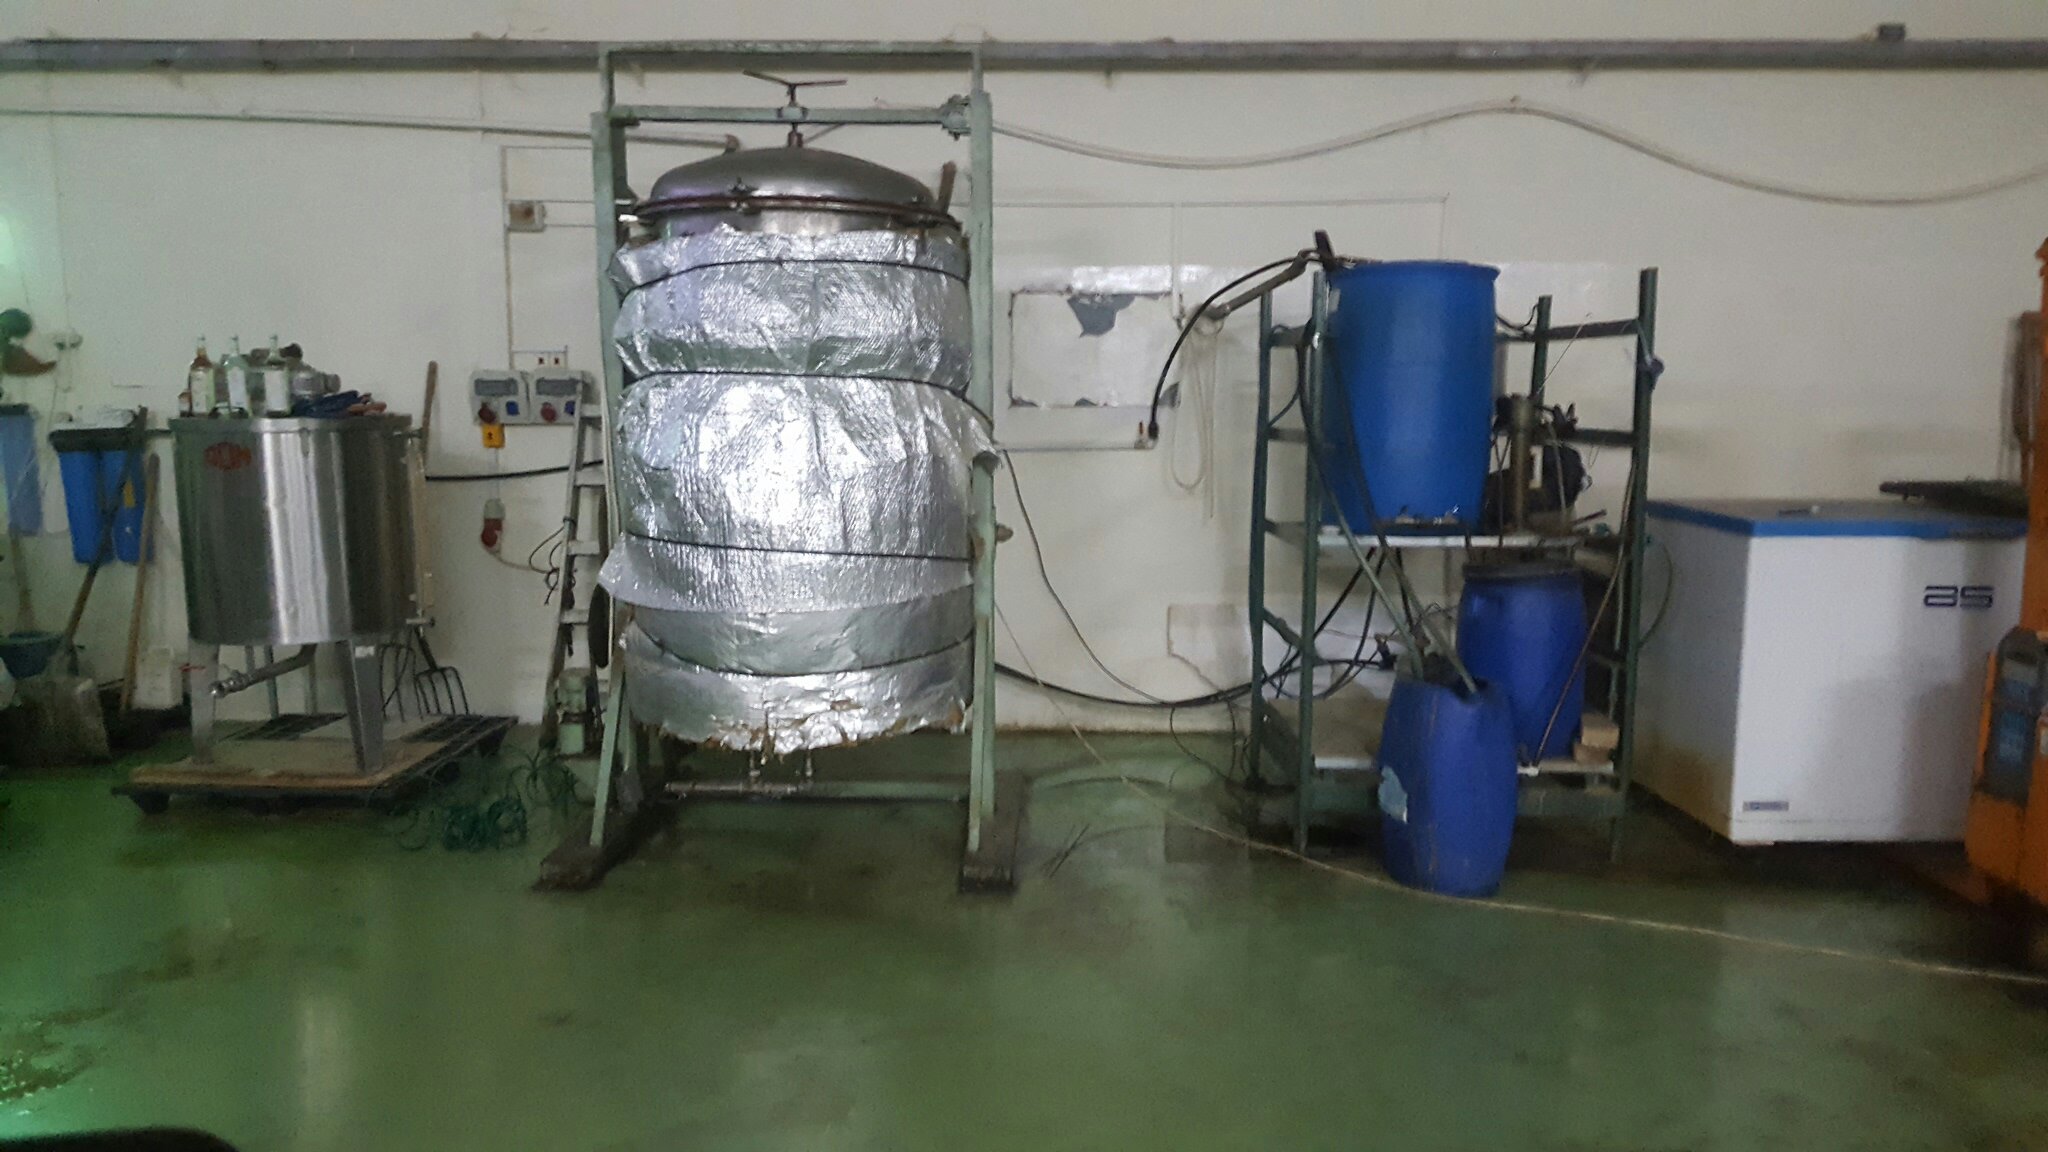 One way of producing essential oils is by steaming the herbs. This tank can hold up to 200kg of herbs. - Herbs of Kedem